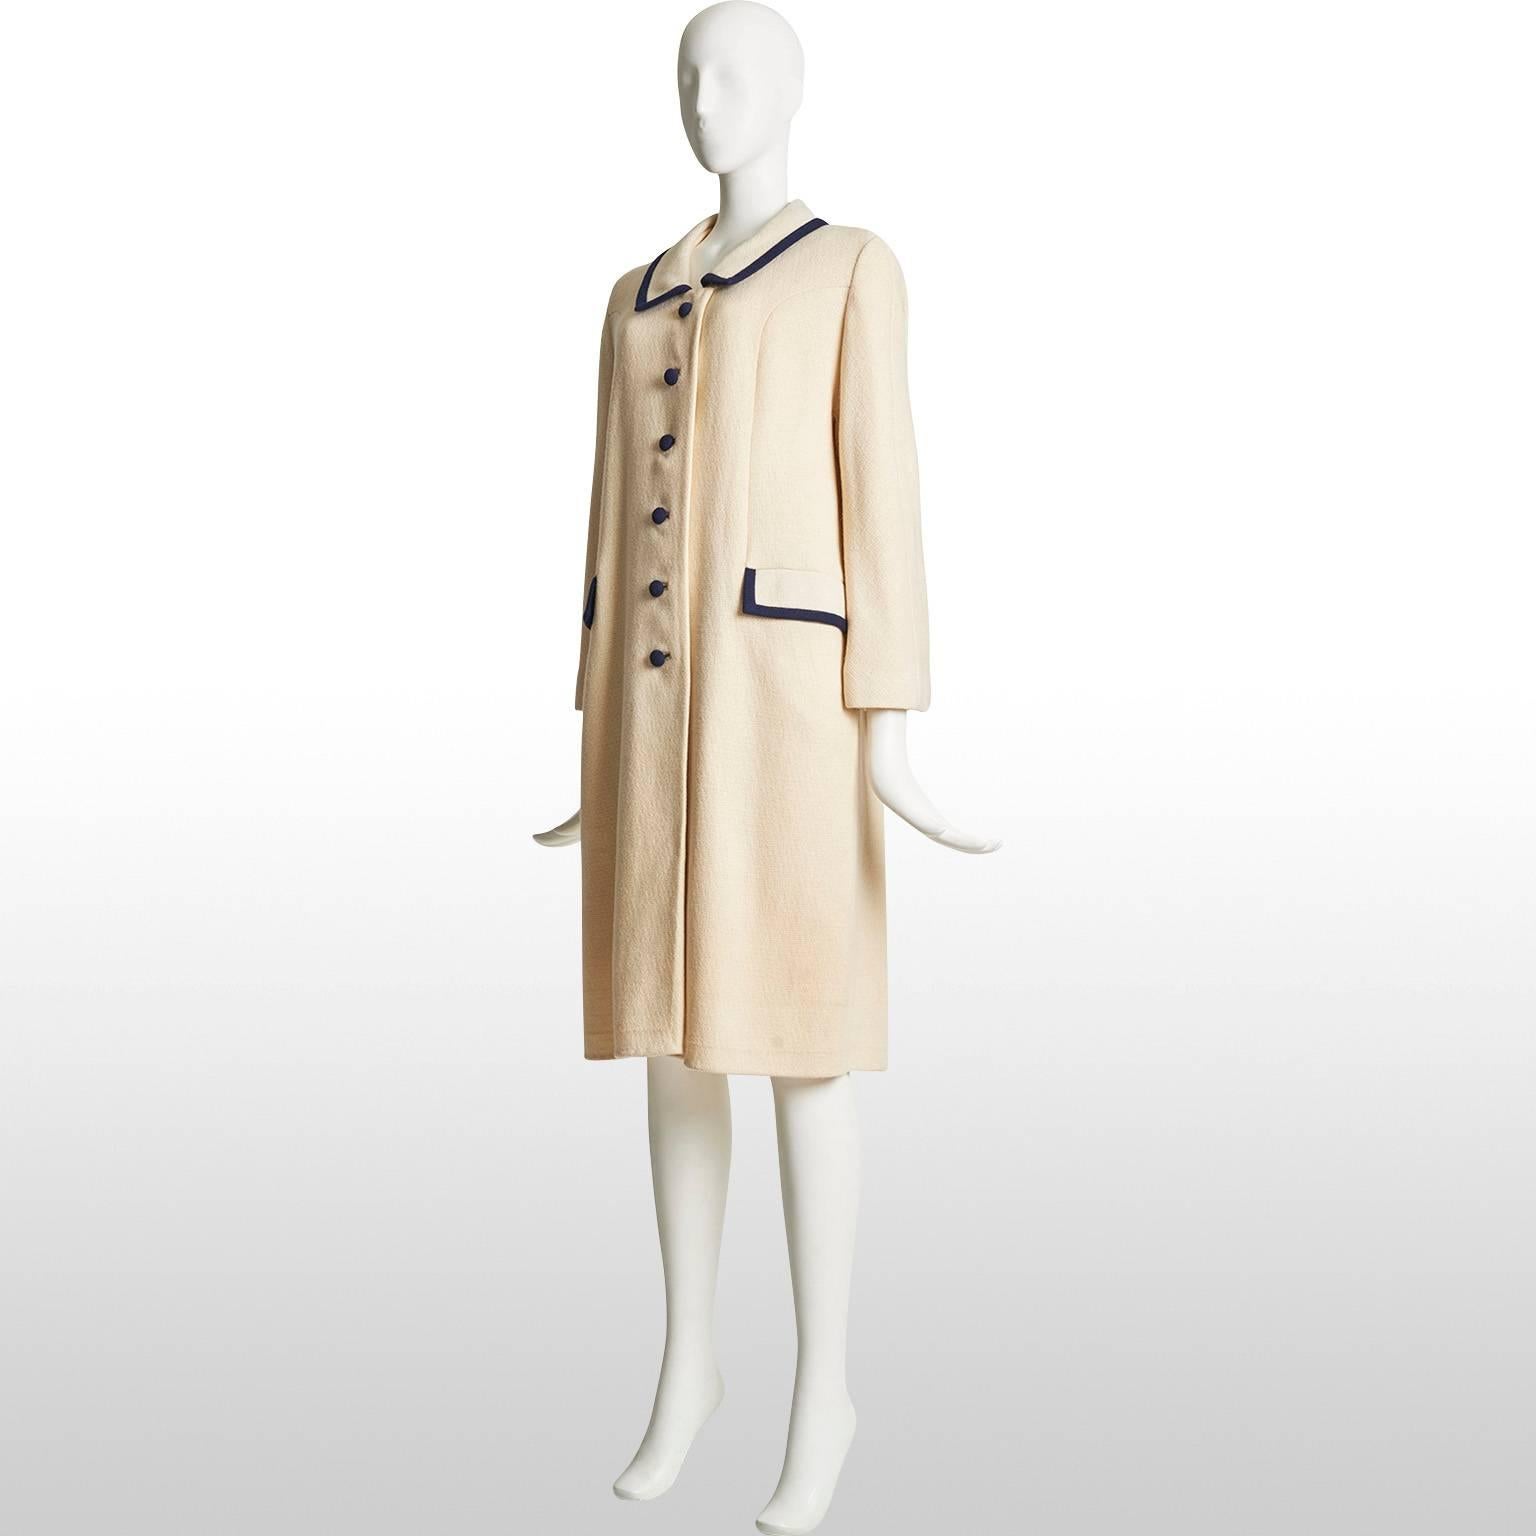 This is a ivory wool mid length coat with navy trimming from the 60s. The coat is single breasted with six navy blue buttons, the side pockets are horizontally aligned and there is a half belt on the back side of the coat. The piece remains in